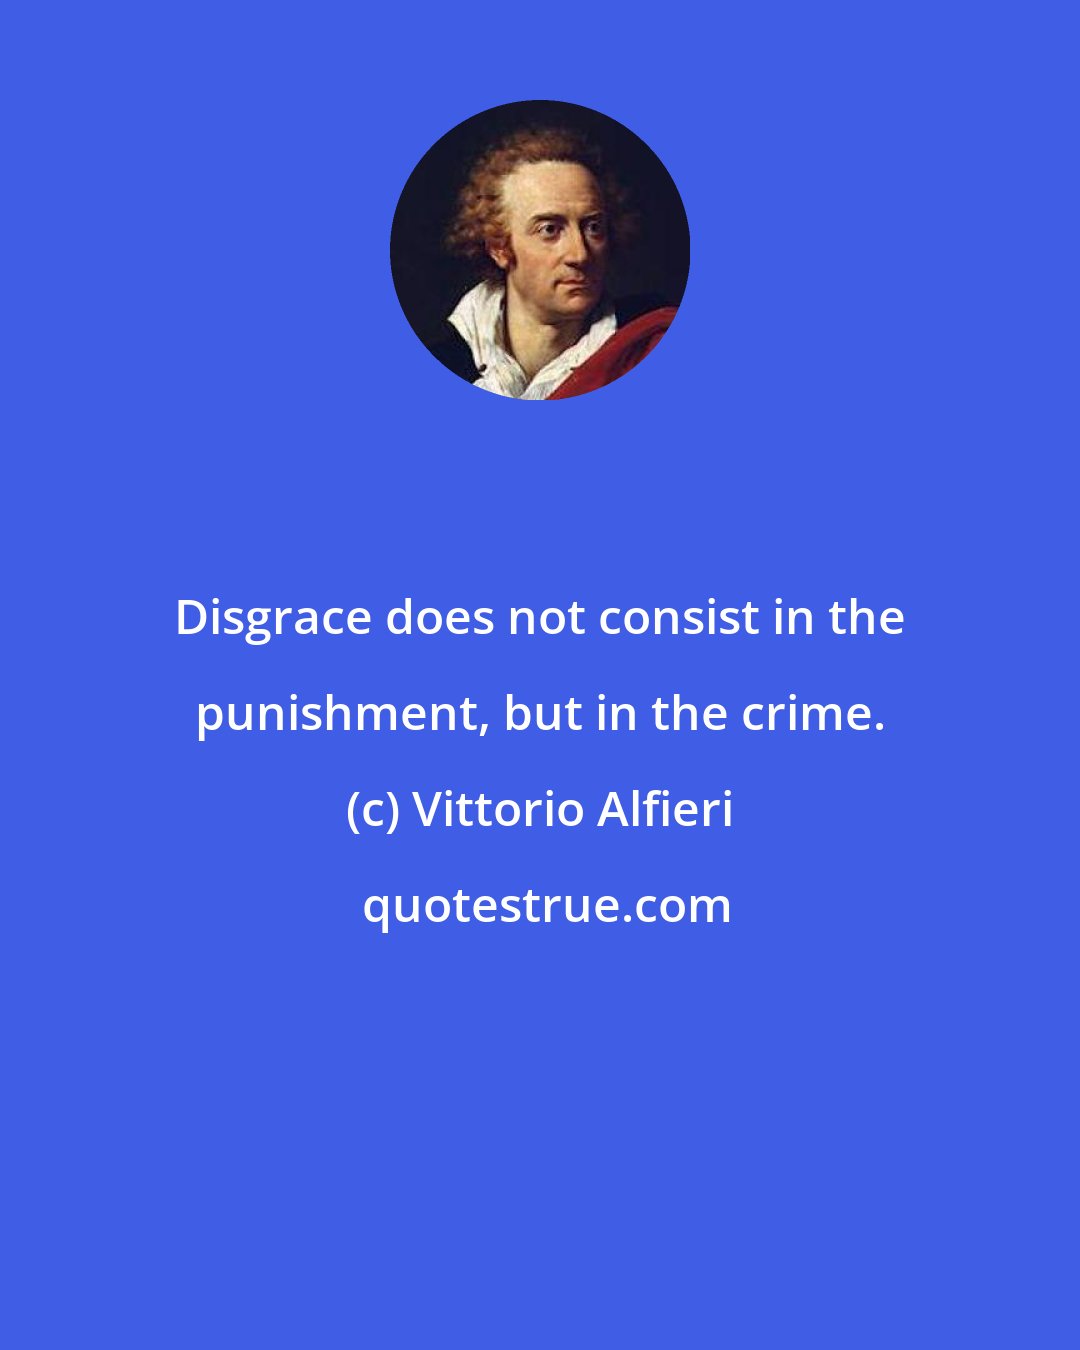 Vittorio Alfieri: Disgrace does not consist in the punishment, but in the crime.